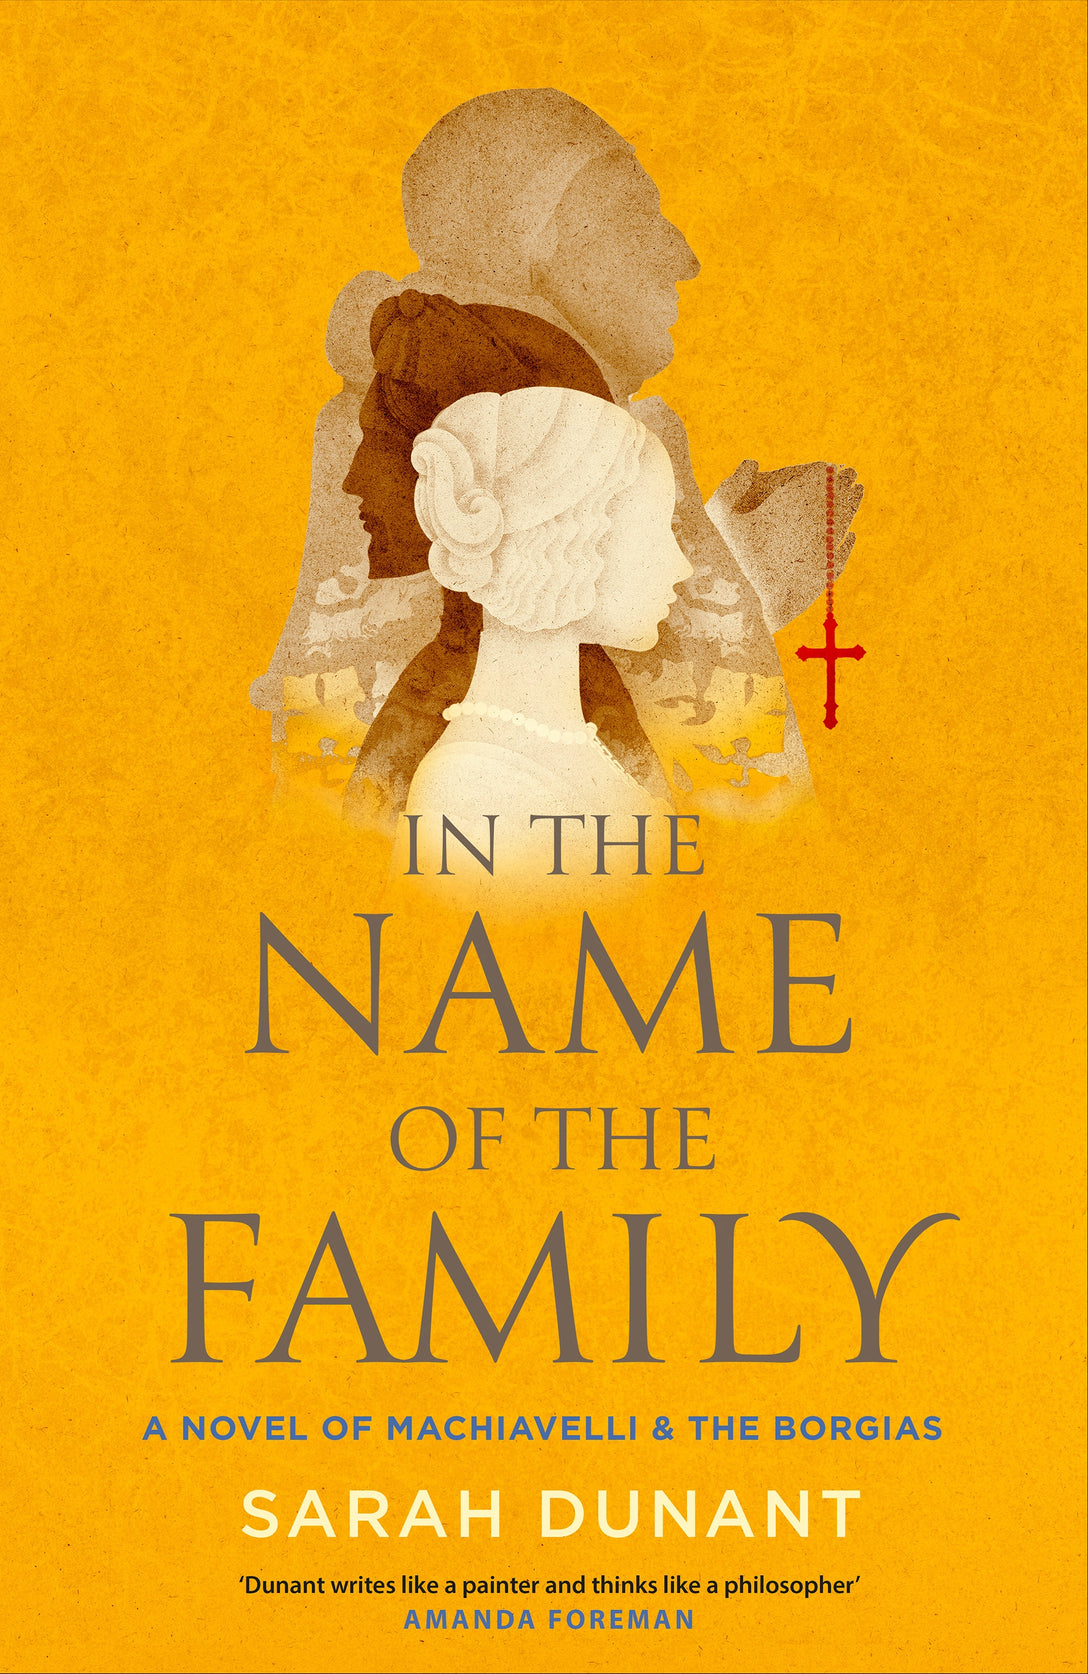 In The Name of the Family by Sarah Dunant